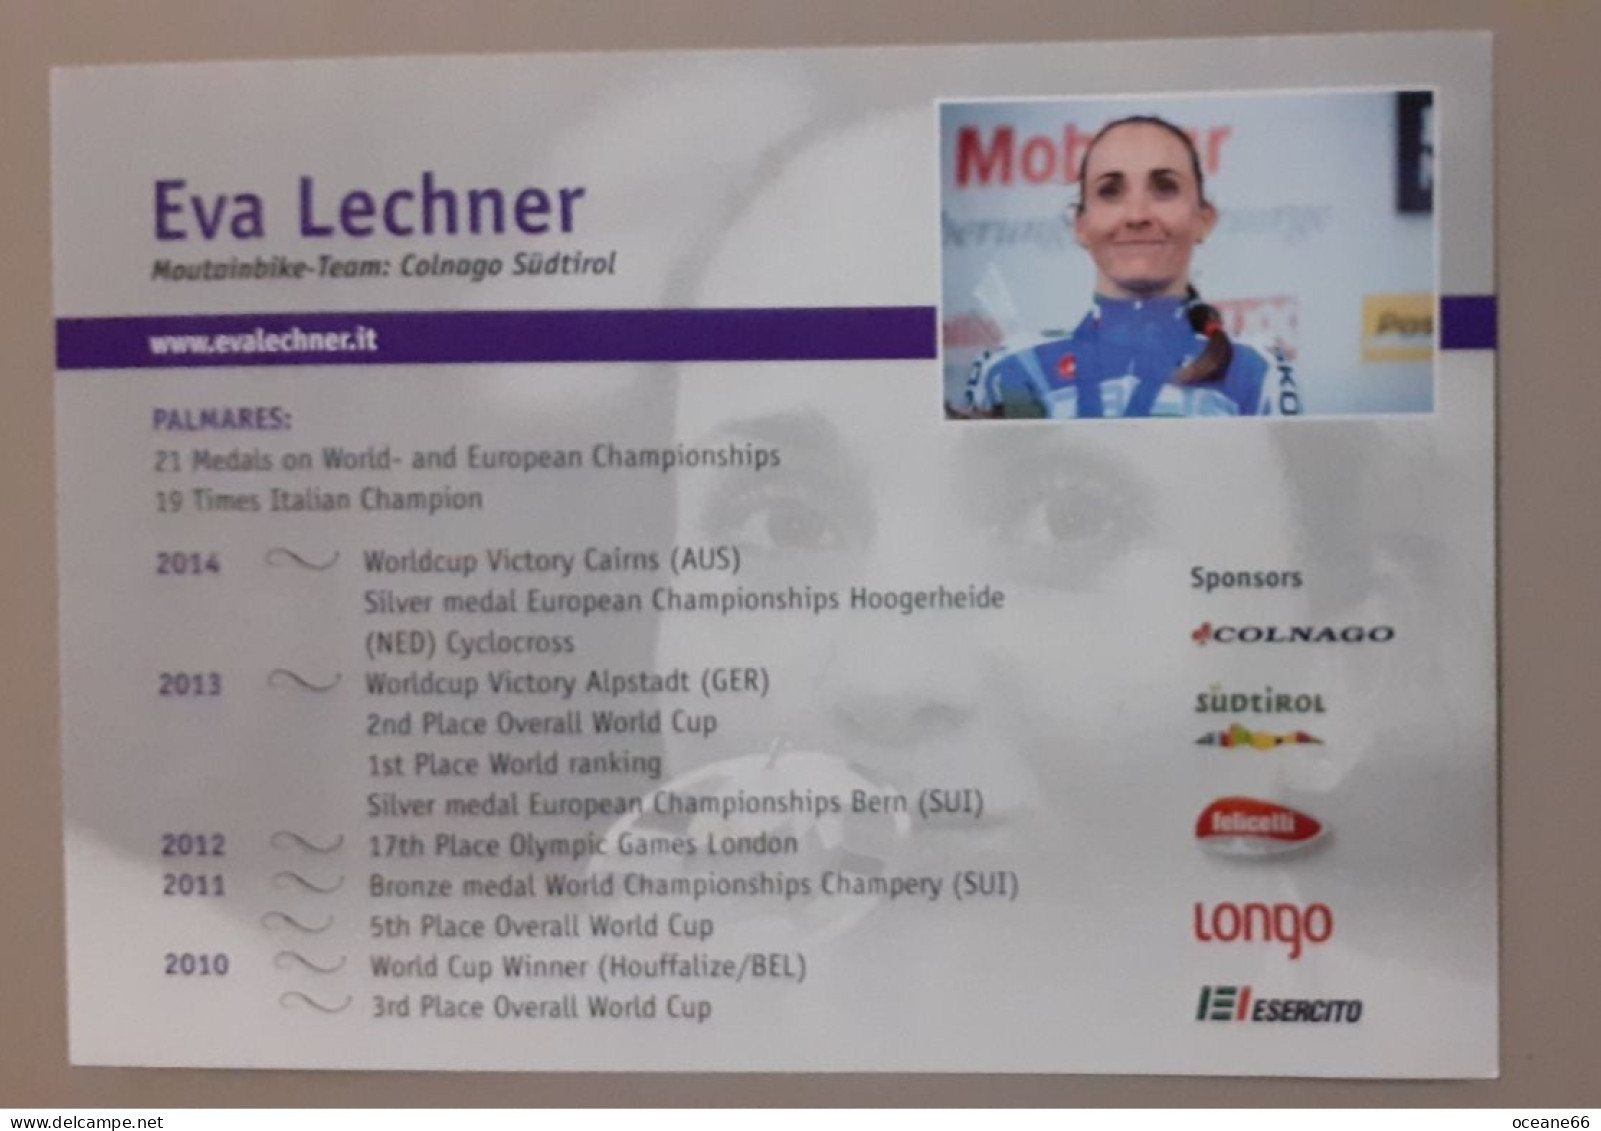 Autographe Eva Lechner Colnago Format A5ppp - Cycling